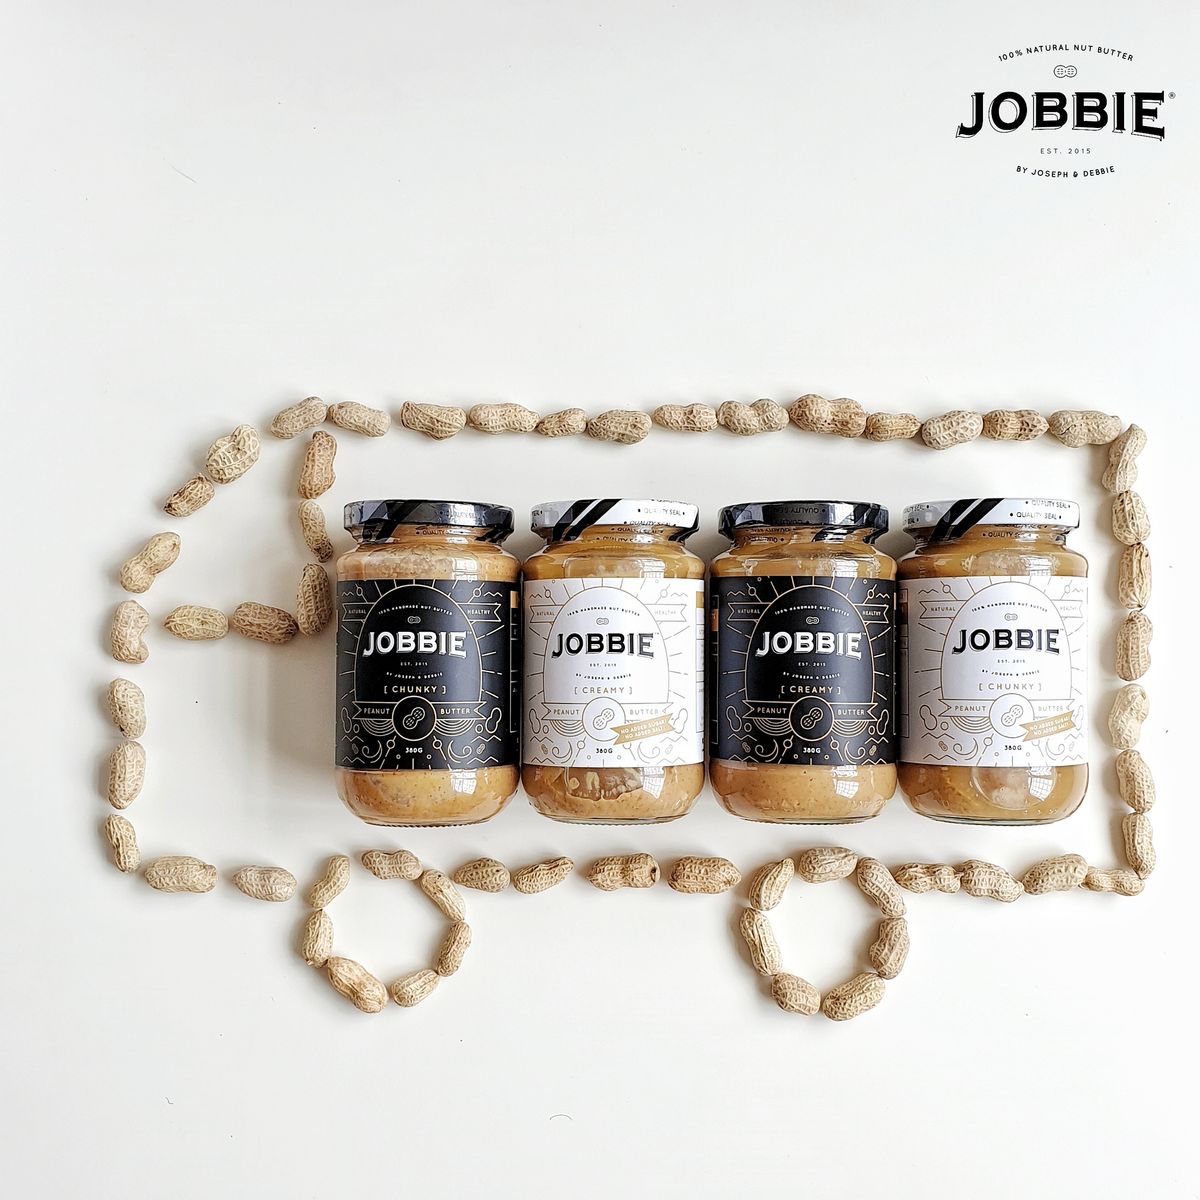 Jobbie Free Shipping promotion now includes shipment to Singapore!